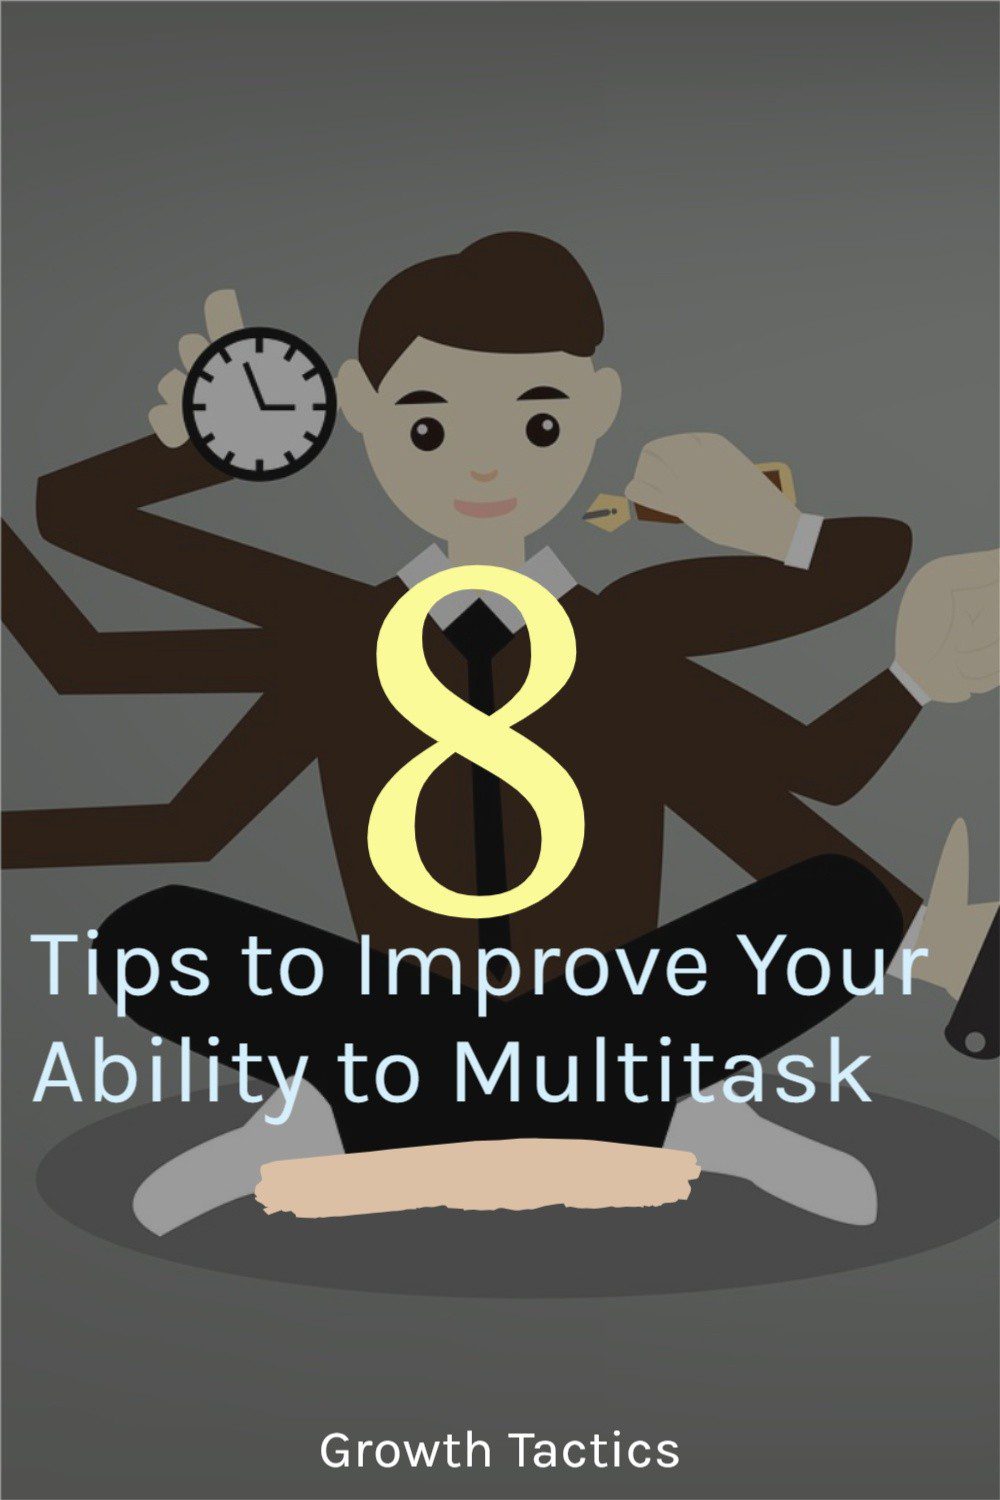 8 Tips to Improve Your Multitasking Skills and Get More Done